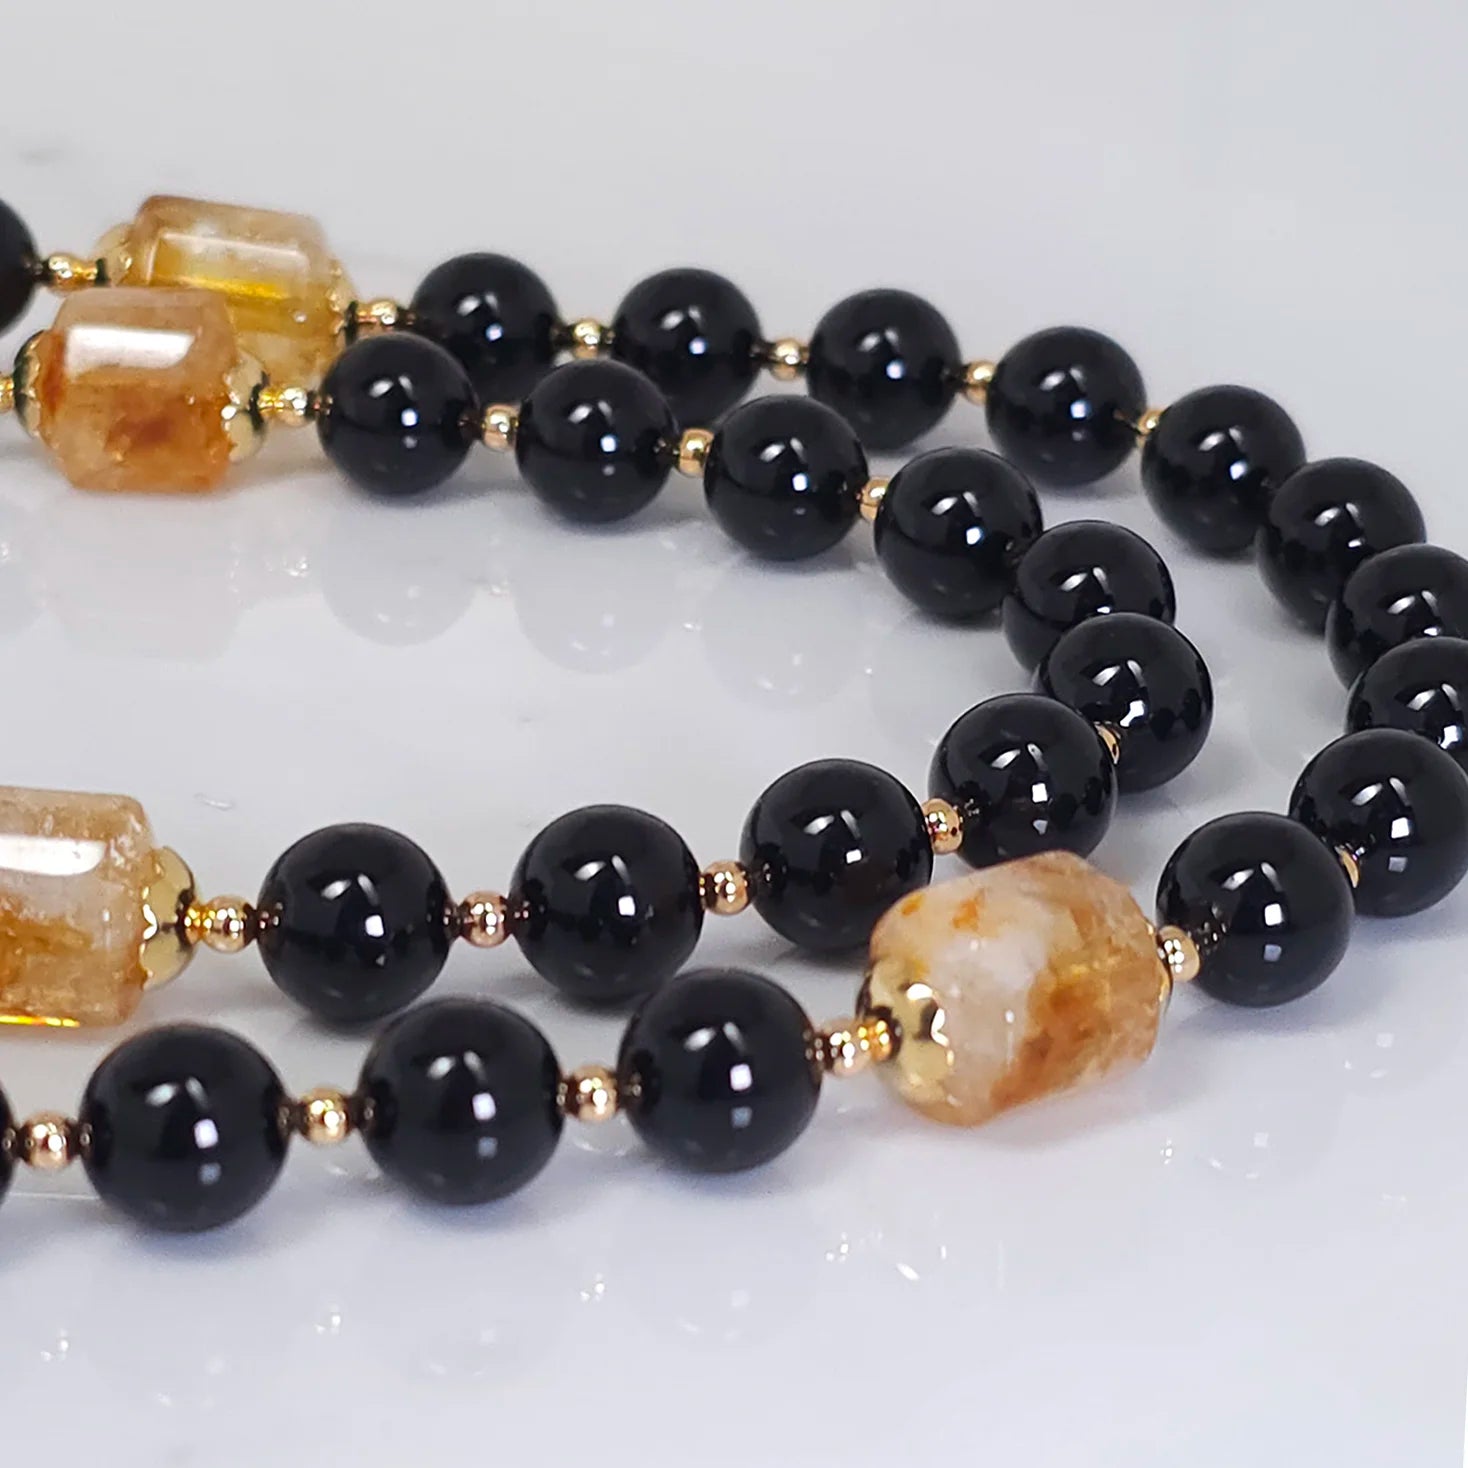 Black Rosary blending the Onyx with the Golden Citrine, with gold-filled wire on a white table.